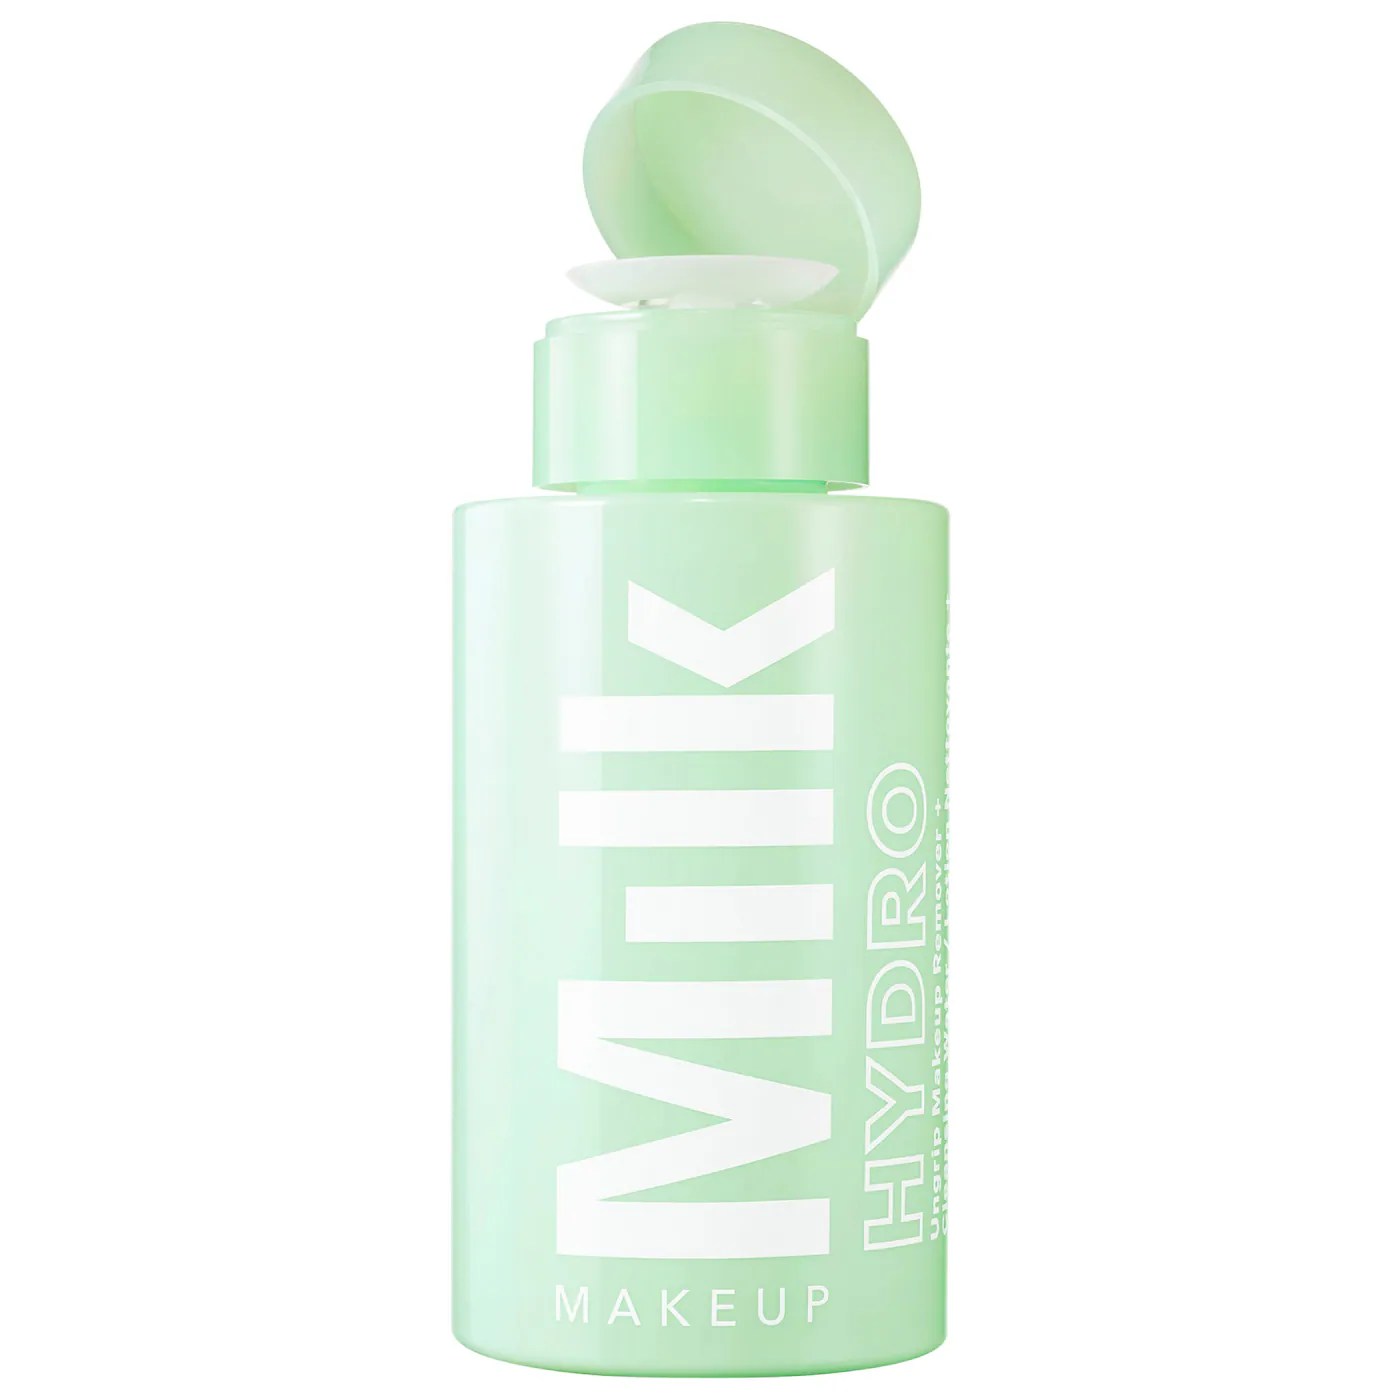 milk hydro, one of the best oil-free makeup removers